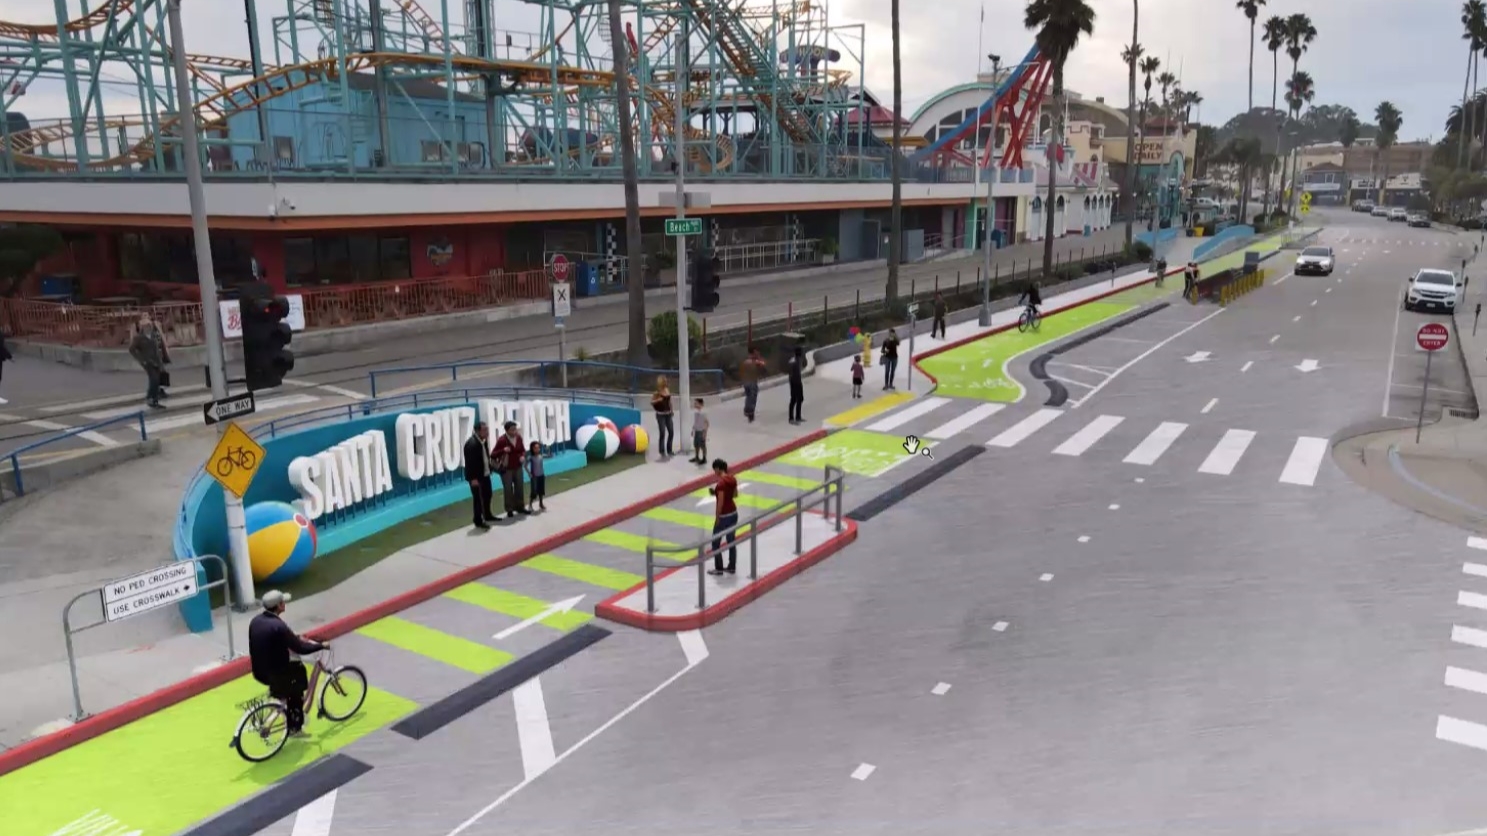 A rendering shows a proposed sidewalk island to accommodate picture takers who often block a bike path near the Santa Cruz Beach Boardwalk. (RRM Design Group)